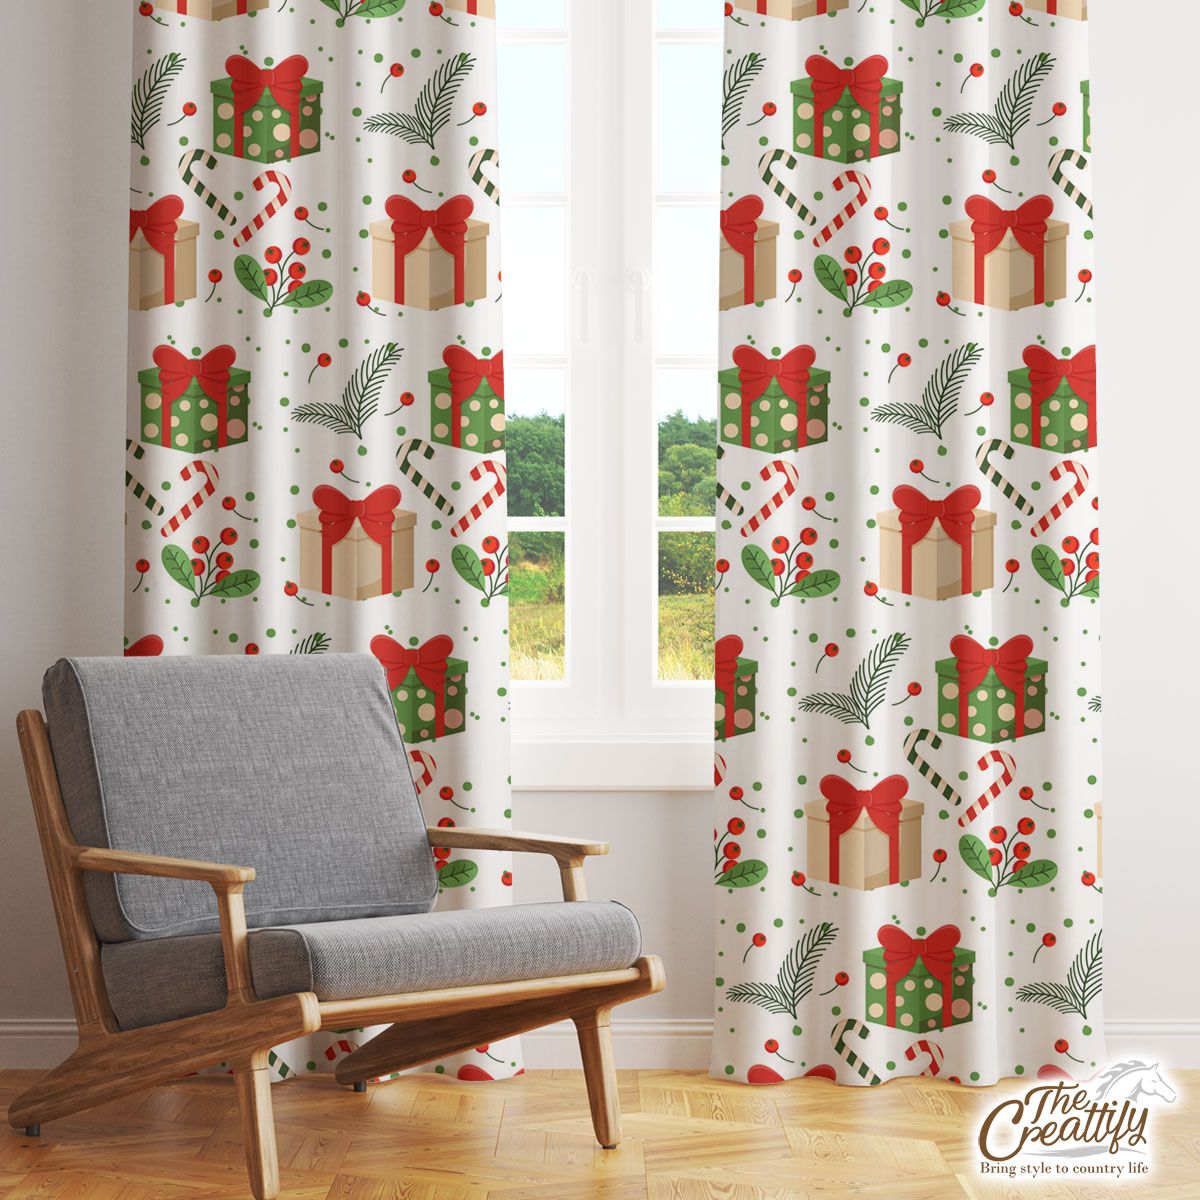 Christmas Gifts And Red Berries Window Curtain